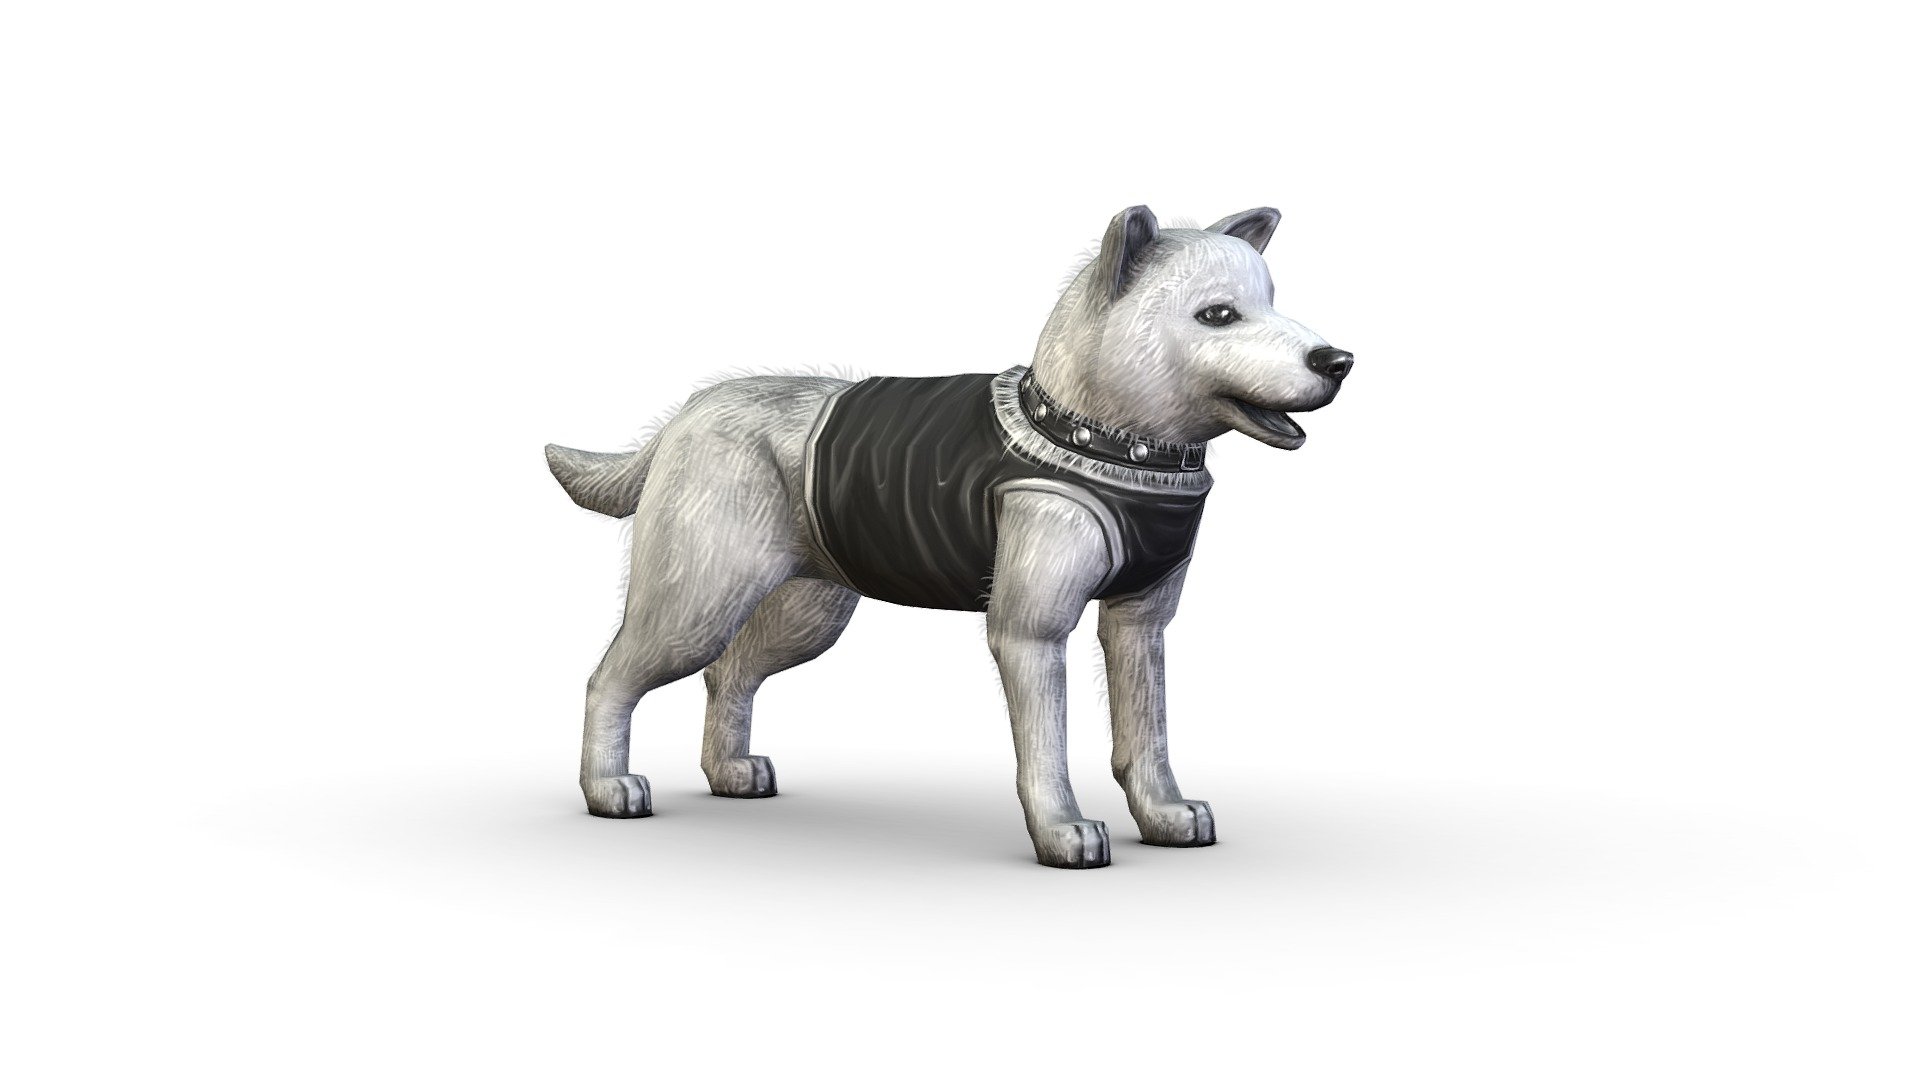 1 color textures 1024x1024

1300 poly count


3dsMax / Maya file included




Support me on Patreon, please - https://www.patreon.com/art_book


 - Low Poly White and Black Funny Dog - Buy Royalty Free 3D model by Oleg Shuldiakov (@olegshuldiakov) 3d model